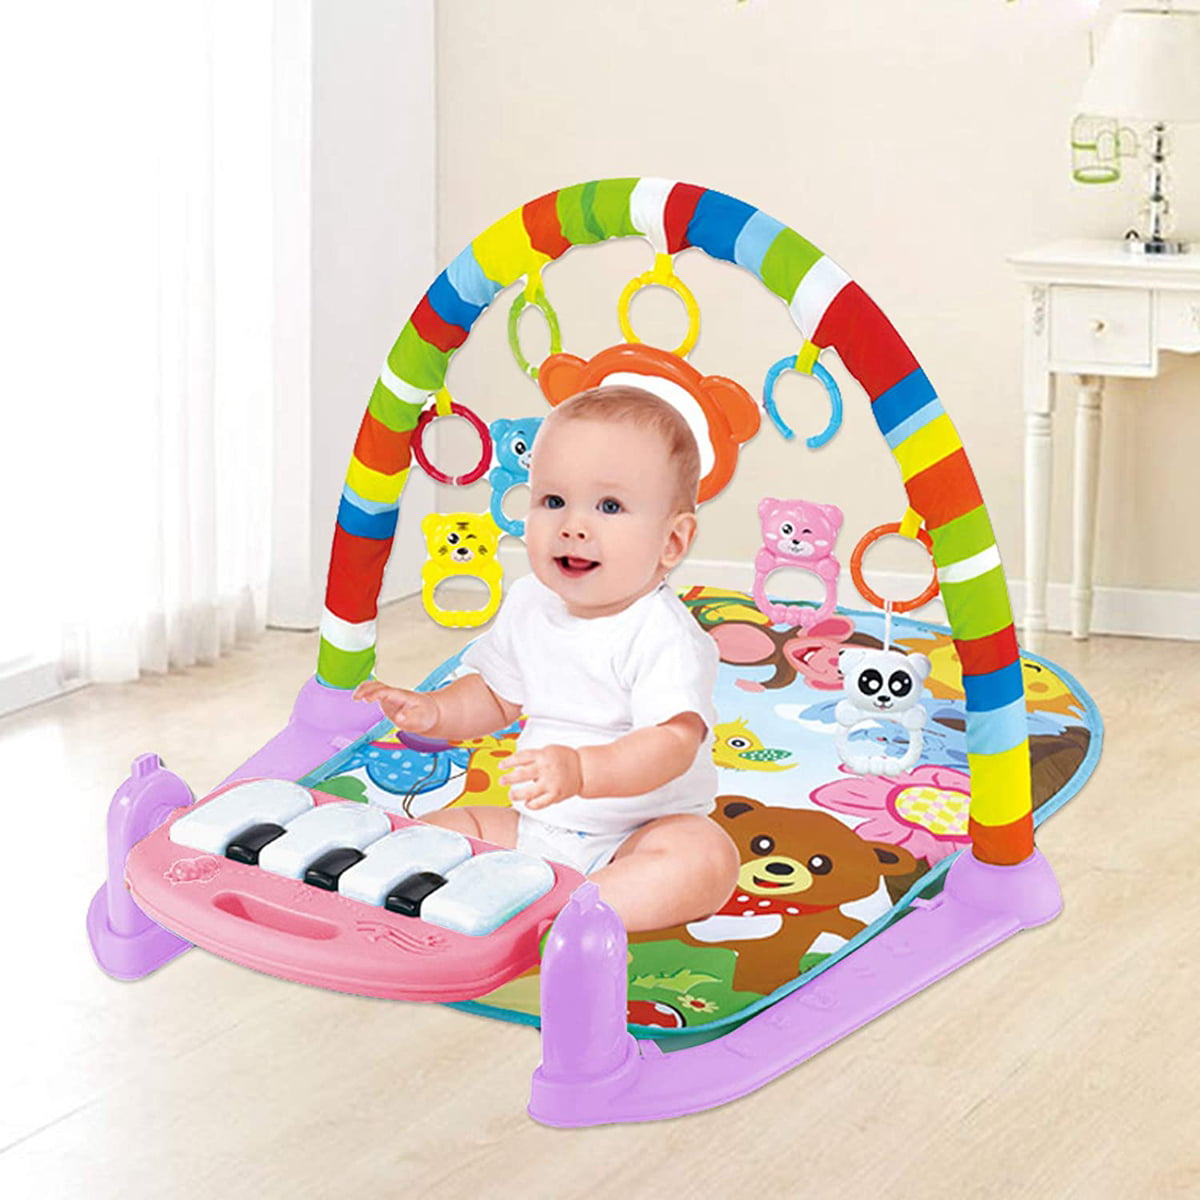 Comfortable Soft Musical Activity Gym Toy Musical Baby Play Mat Baby Play Gym Activity Mat with Hanging Toys Kick and Play Piano Gym Newborn Kick and Playmat Good for Baby Growth 